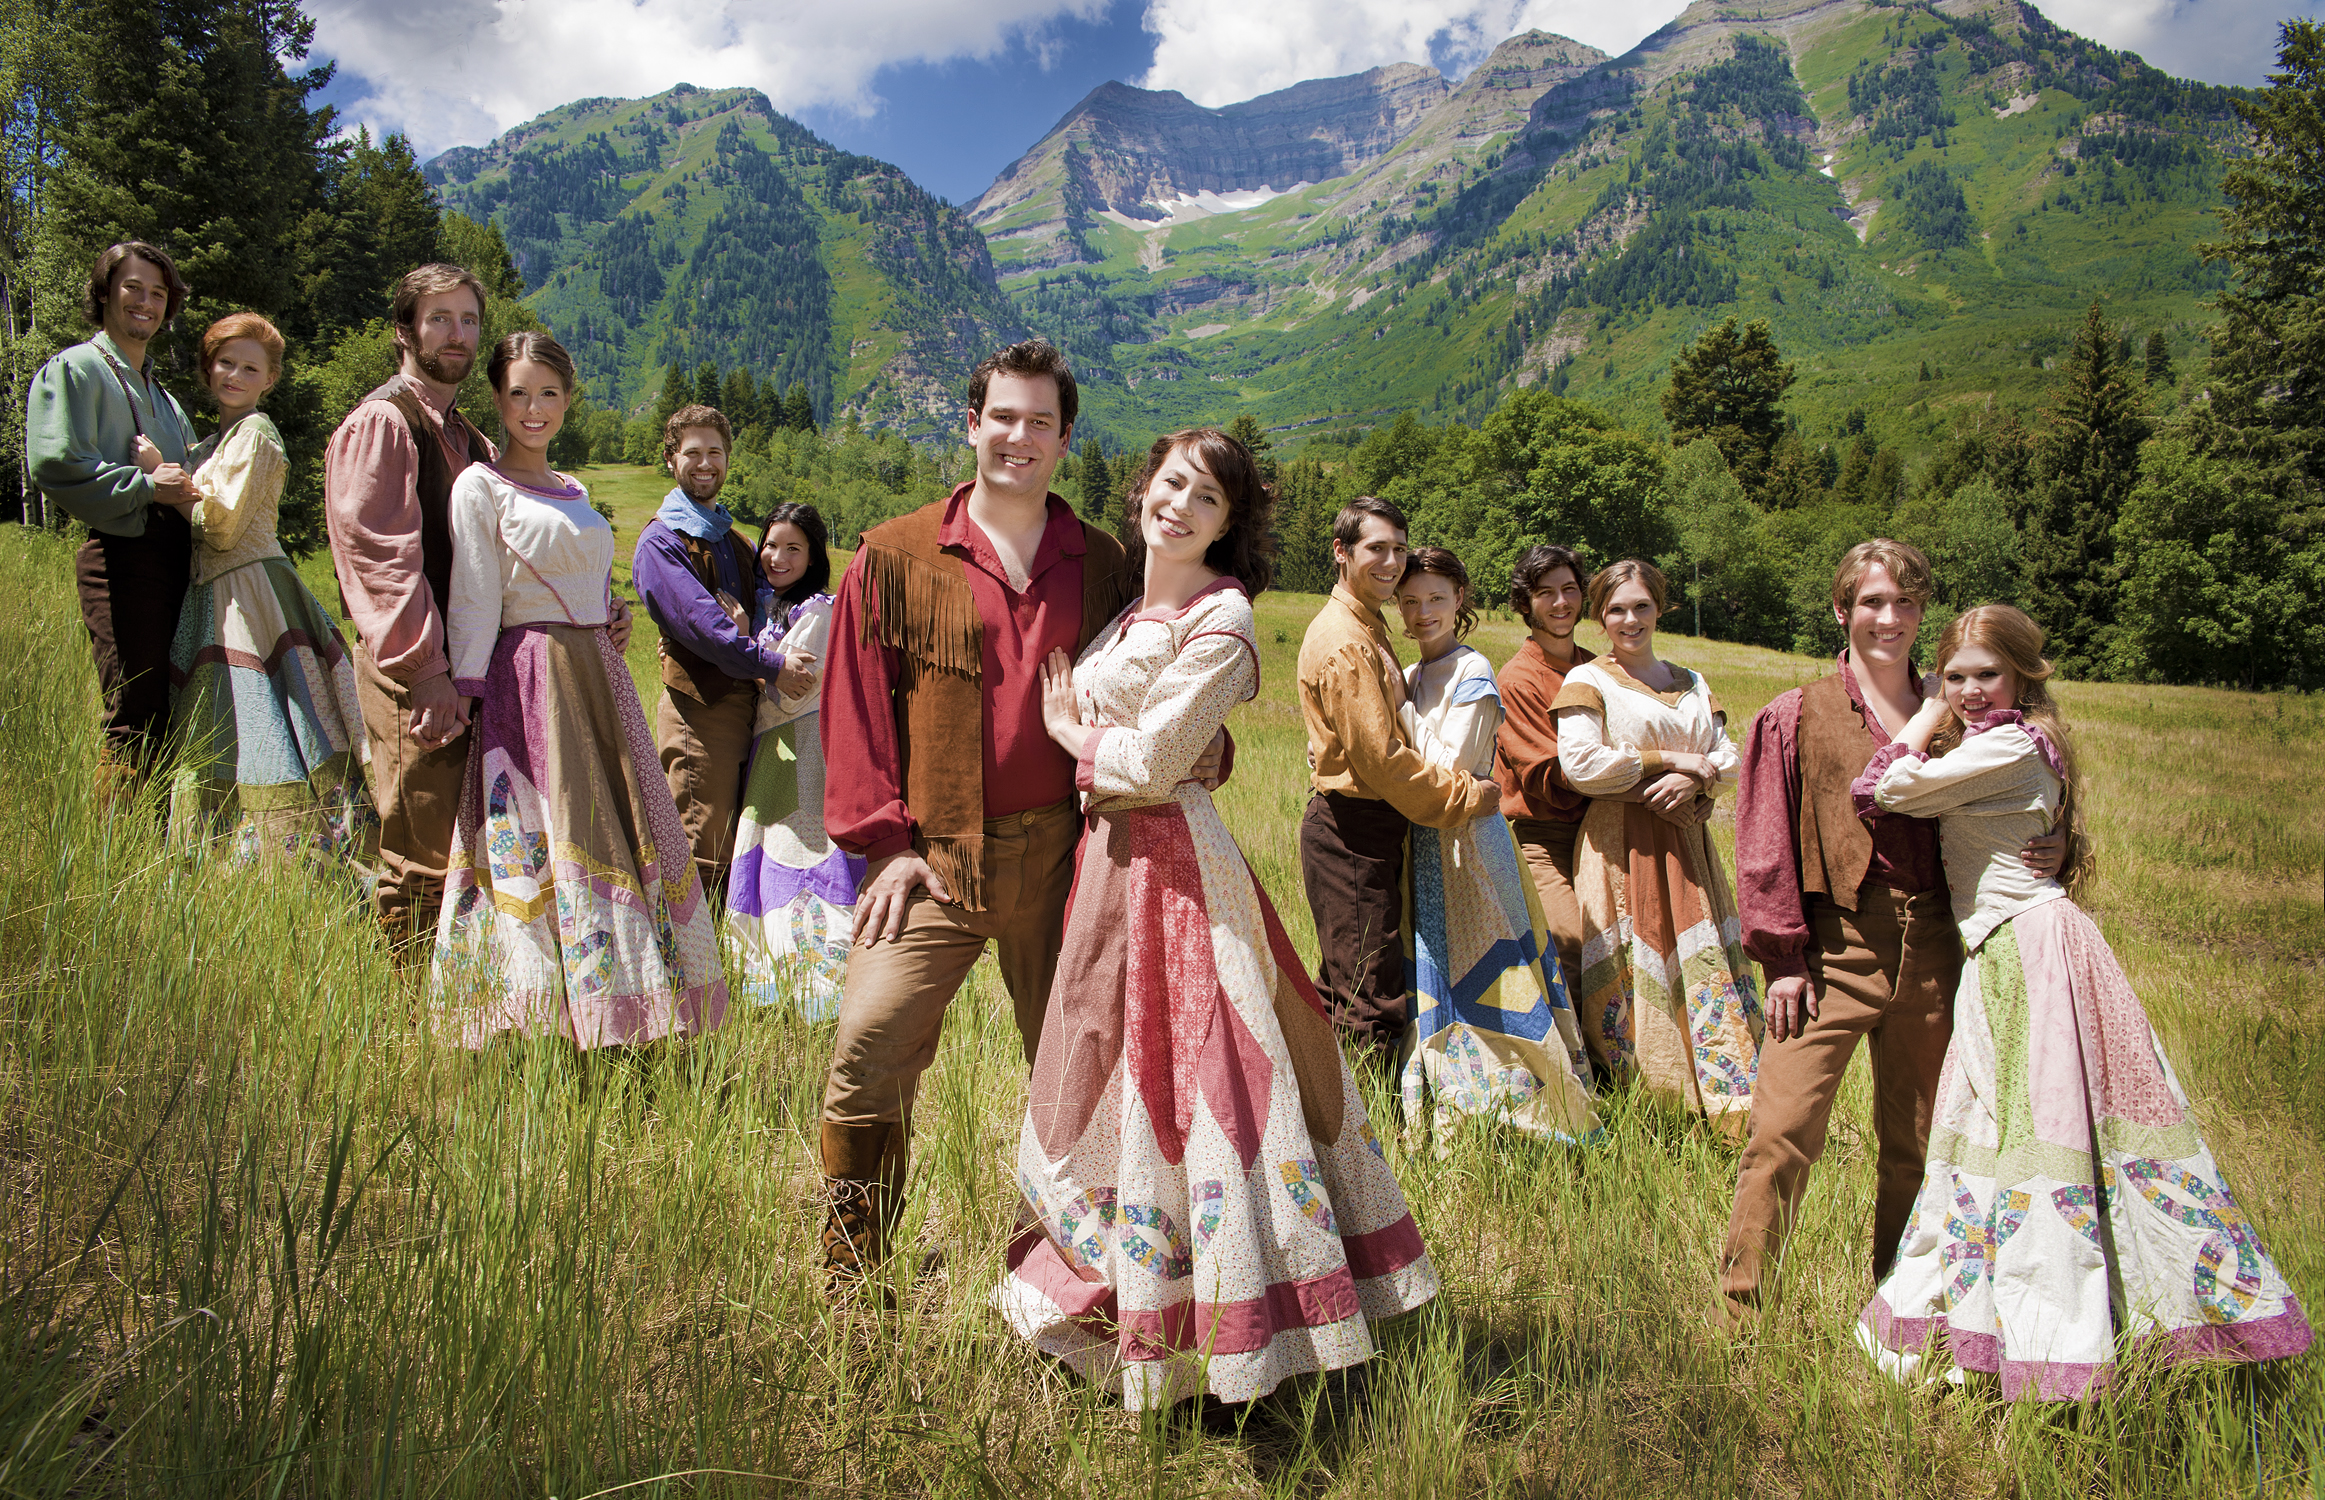 Bless your beautiful hide! SEVEN BRIDES is at Sundance